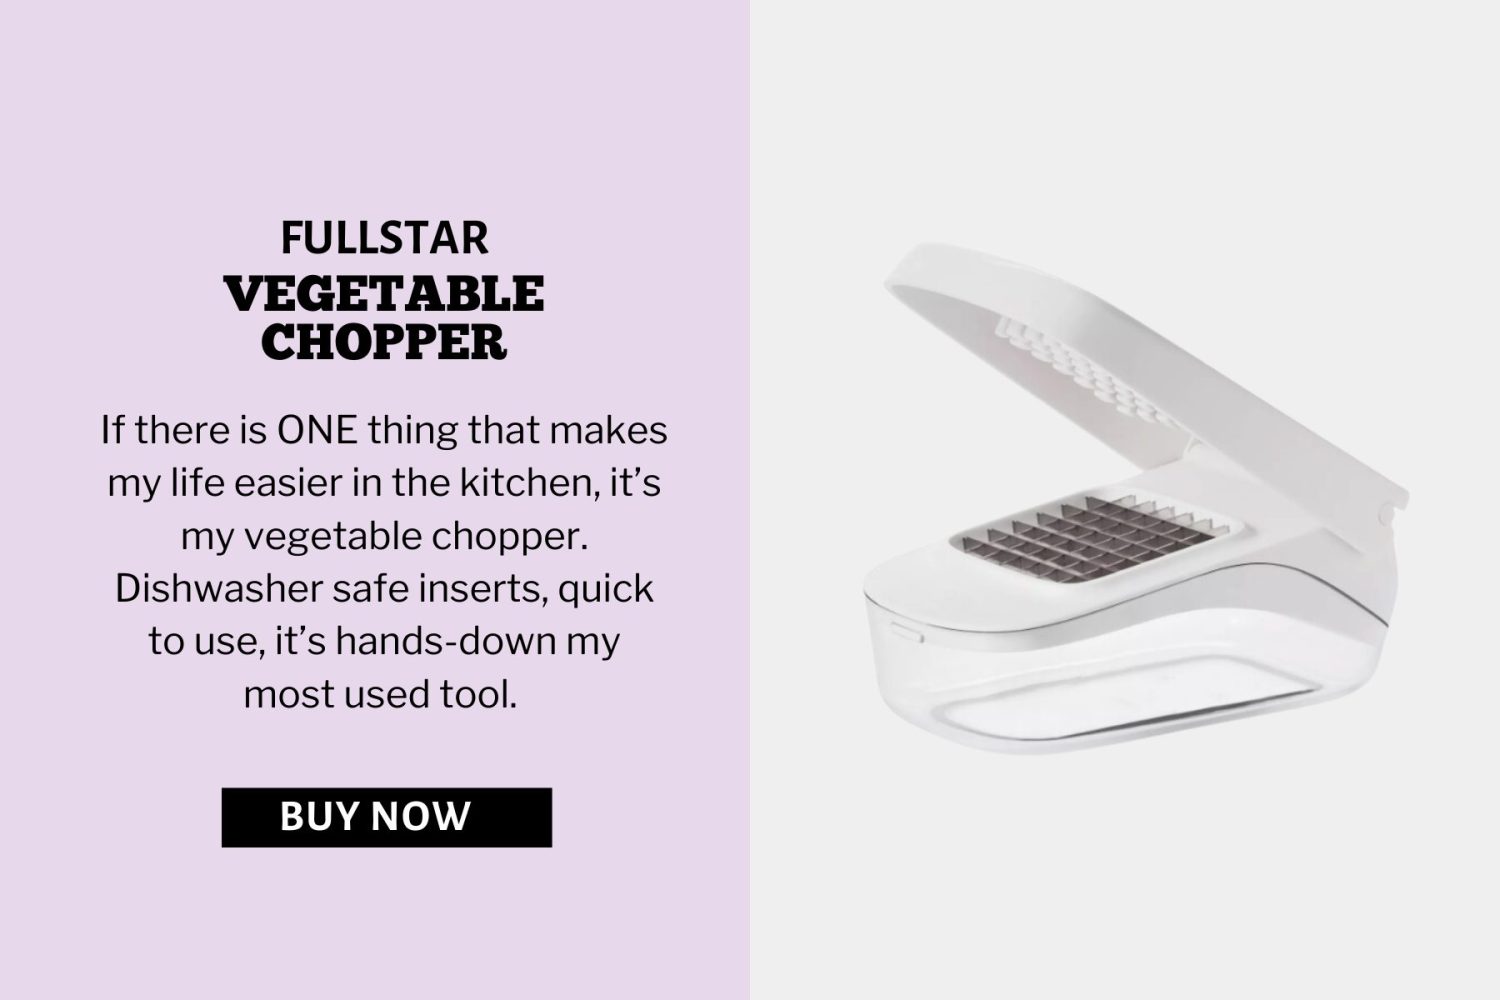 vegetable chopper product image.